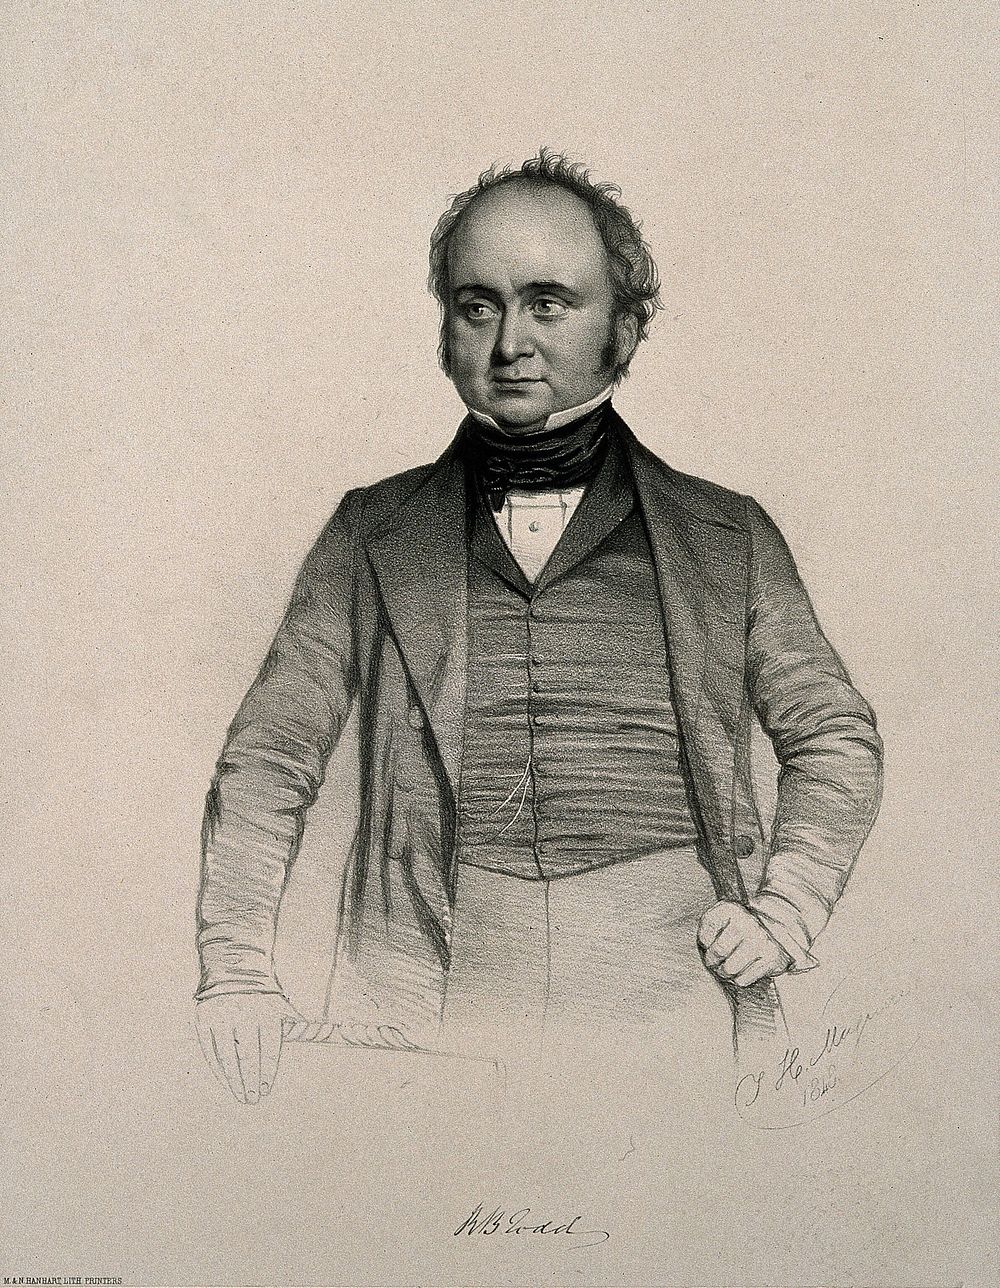 Robert Bentley Todd. Lithograph by T. H. Maguire, 1848.